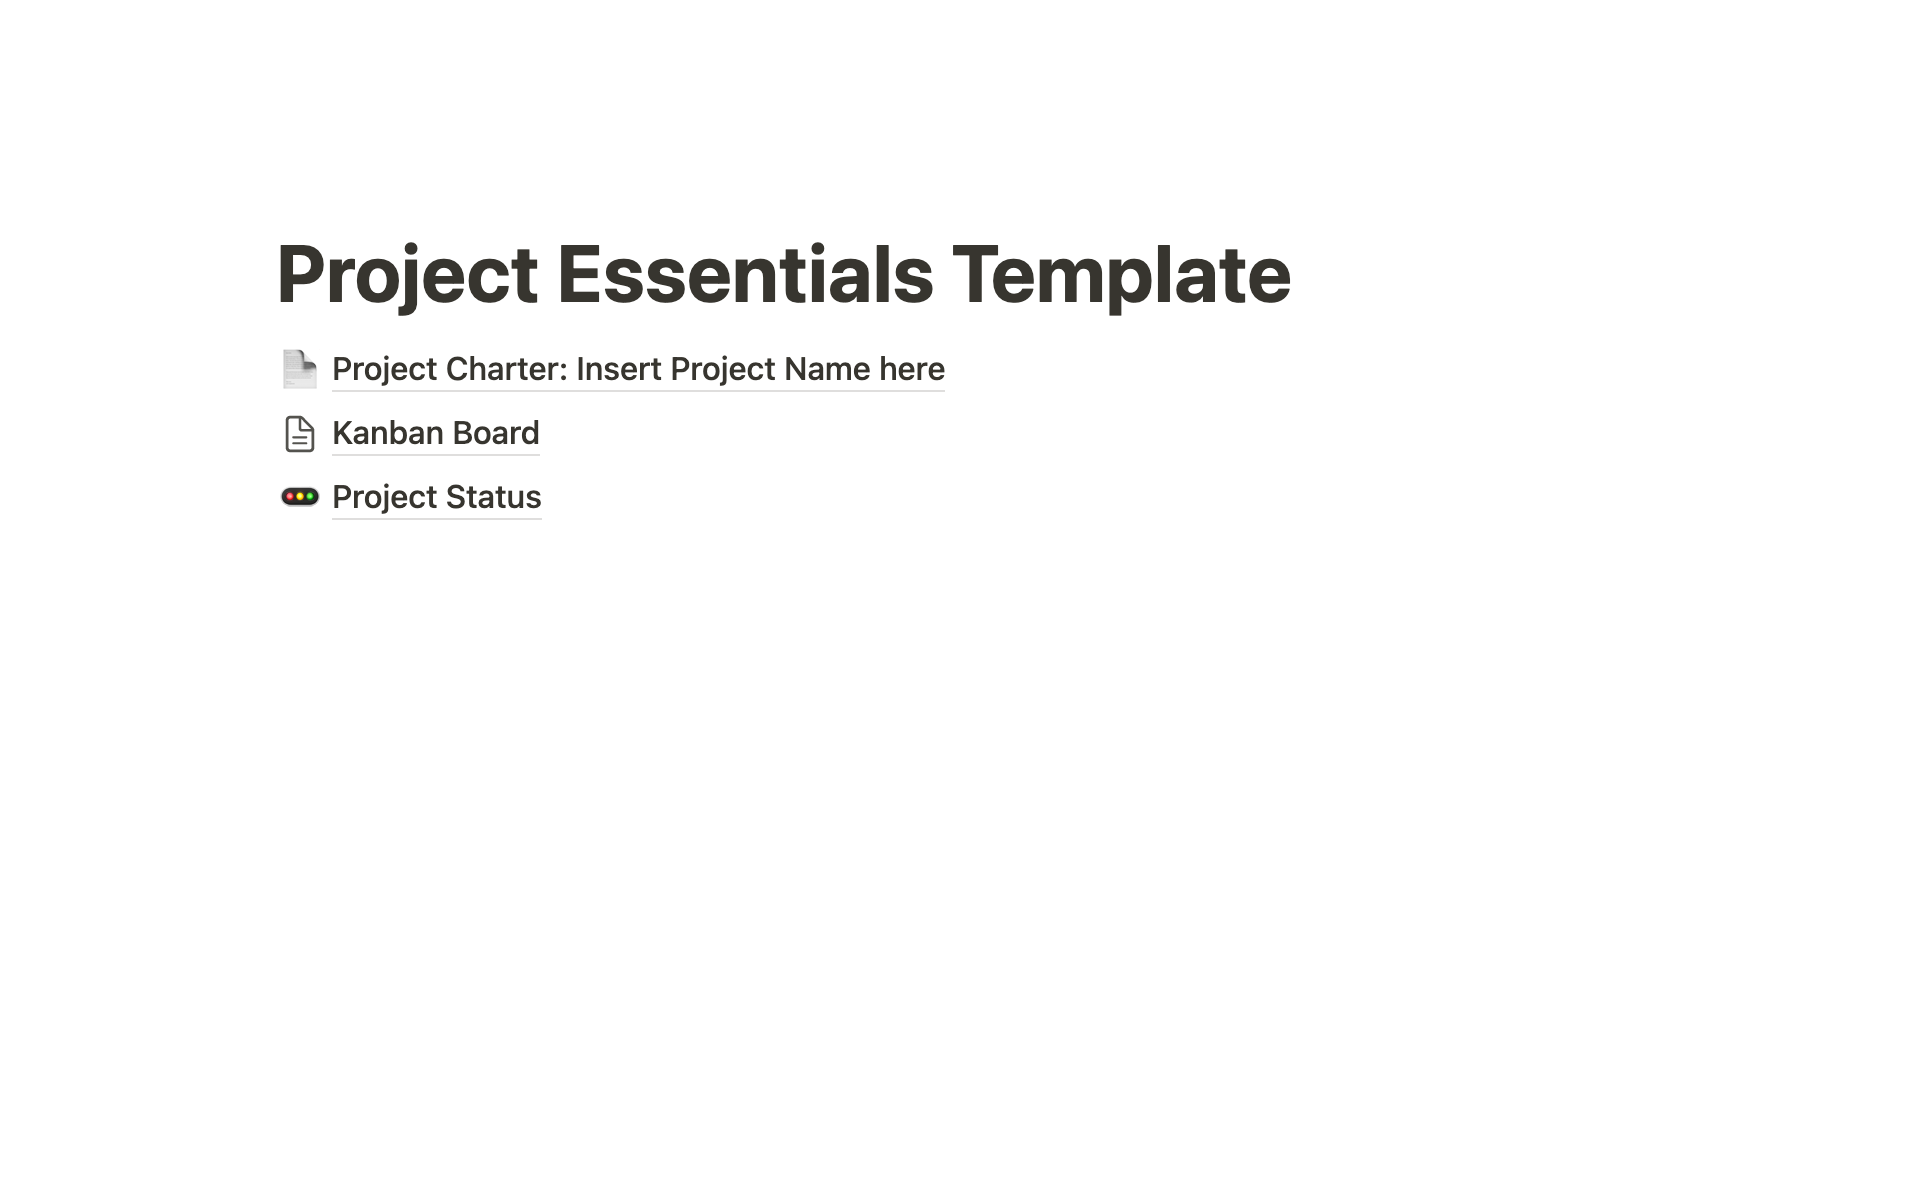 A template preview for Project Essentials